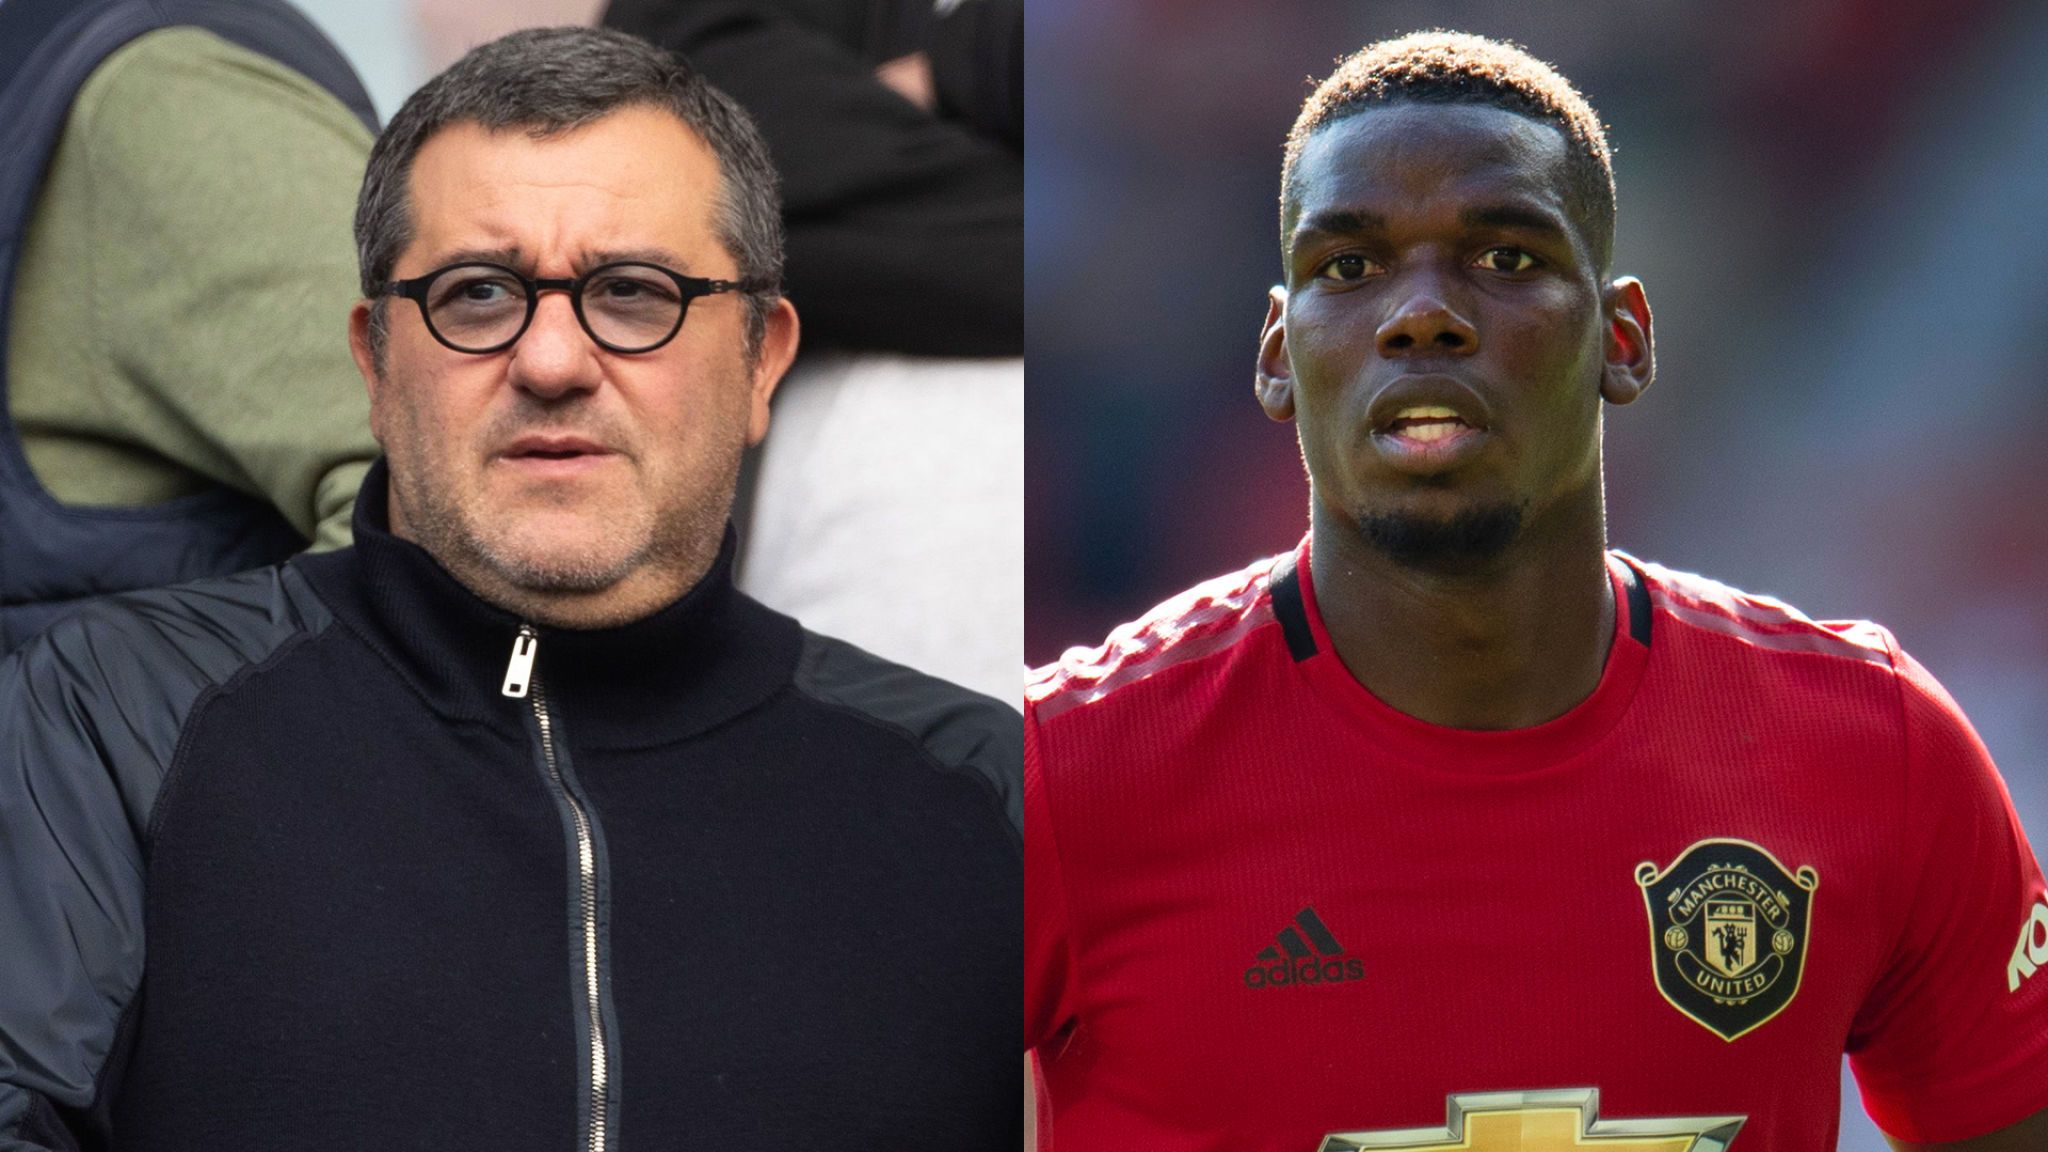 Paul Pogba’s agent Mino Raiola promises to stop sending players to Manchester United - Bóng Đá